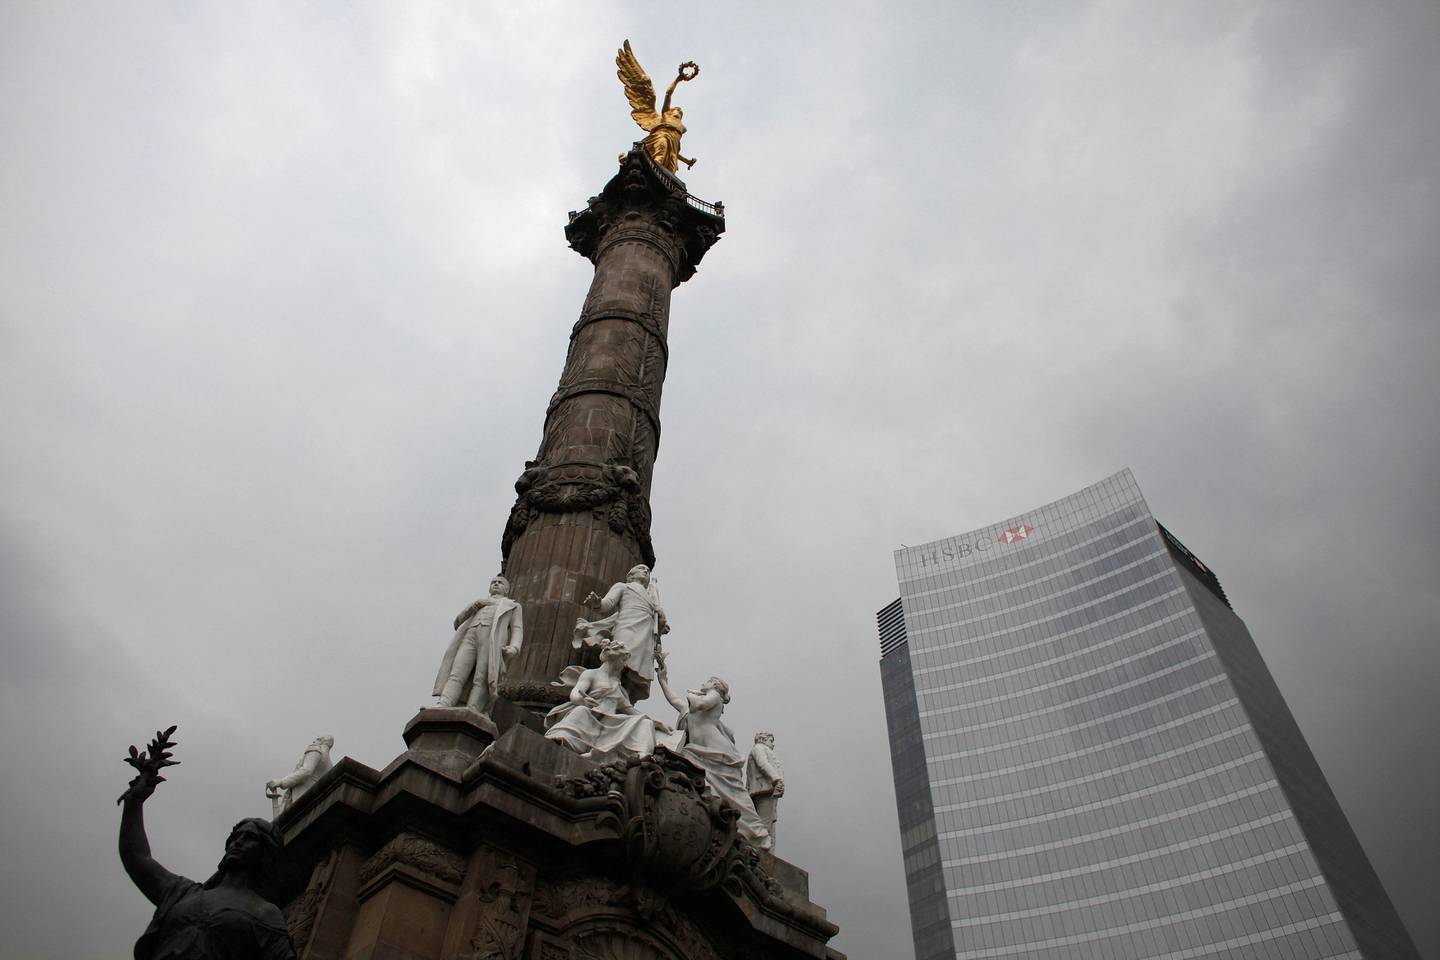 The Angel of Independence monument stands next to HSBC's headquarters in Mexico City. Reuters